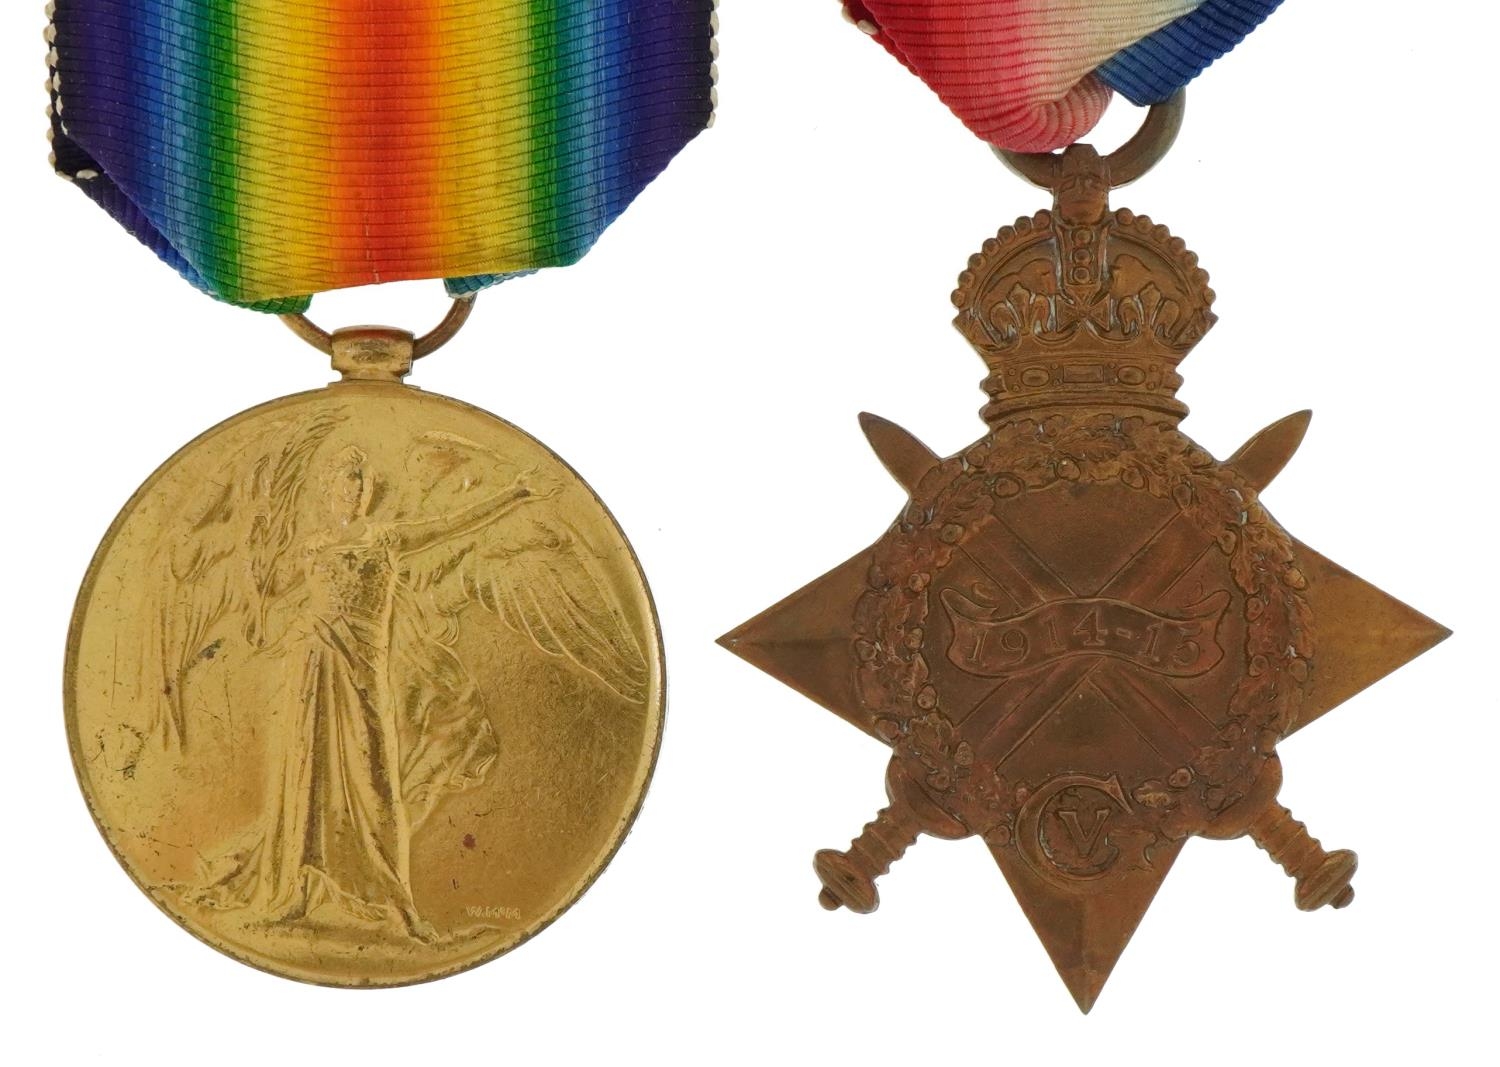 British military World War I medals comprising Victory medal and 1914-1915 star awarded to PS-3857.